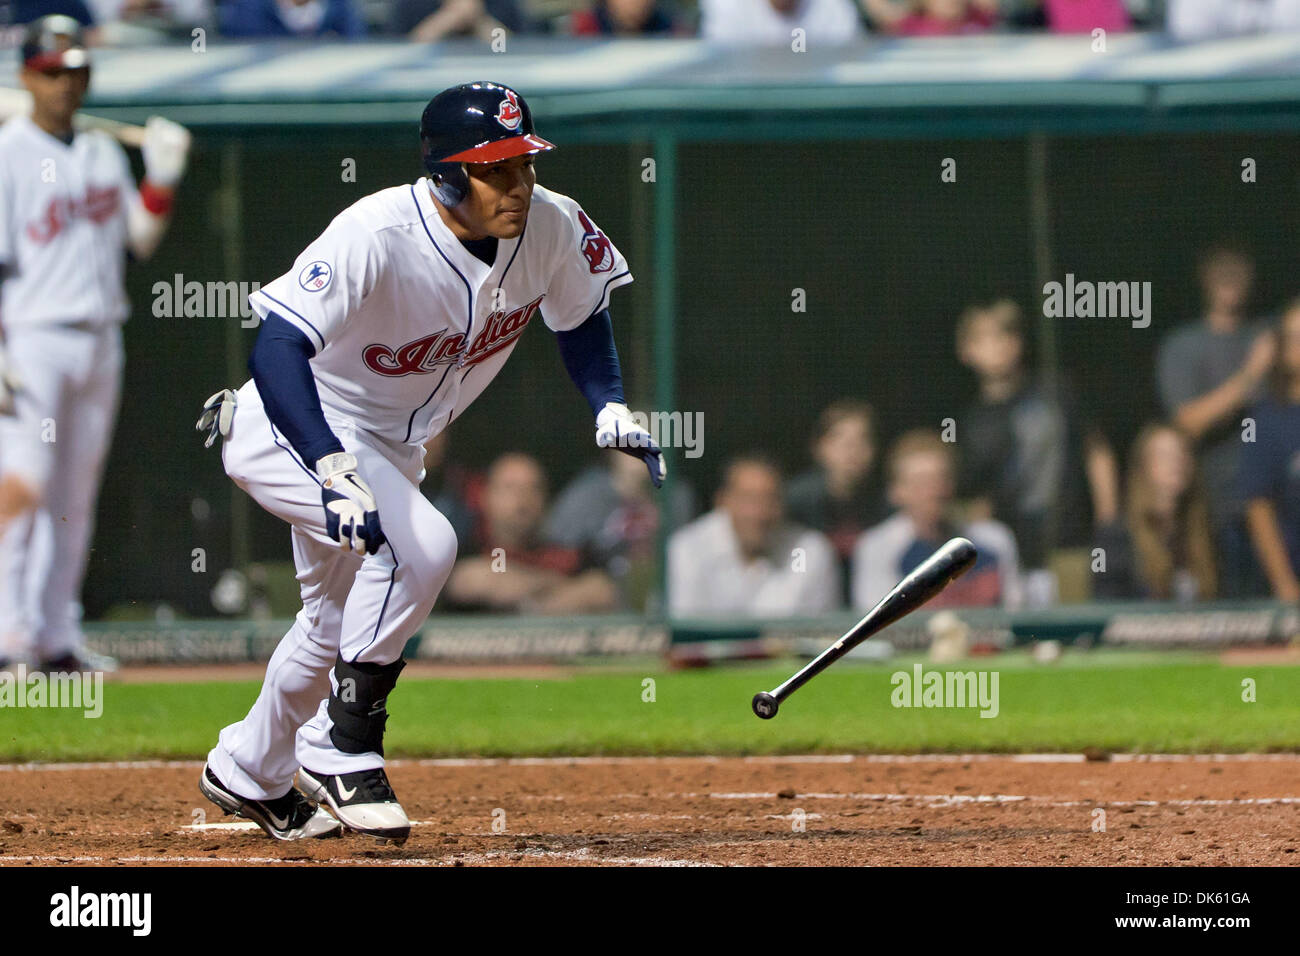 May 20, 2011 - Cleveland, Ohio, U.S - Cleveland pinch hitter Ezequiel Carrera (12) runs to first as he lays down a drag bunt for his first major league hit to drive in the winning run in the eighth inning against Cincinnati. The Cleveland Indians rallied to defeated the Cincinnati Reds 5-4 at Progressive Field in Cleveland, Ohio. (Credit Image: © Frank Jansky/Southcreek Global/ZUMA Stock Photo